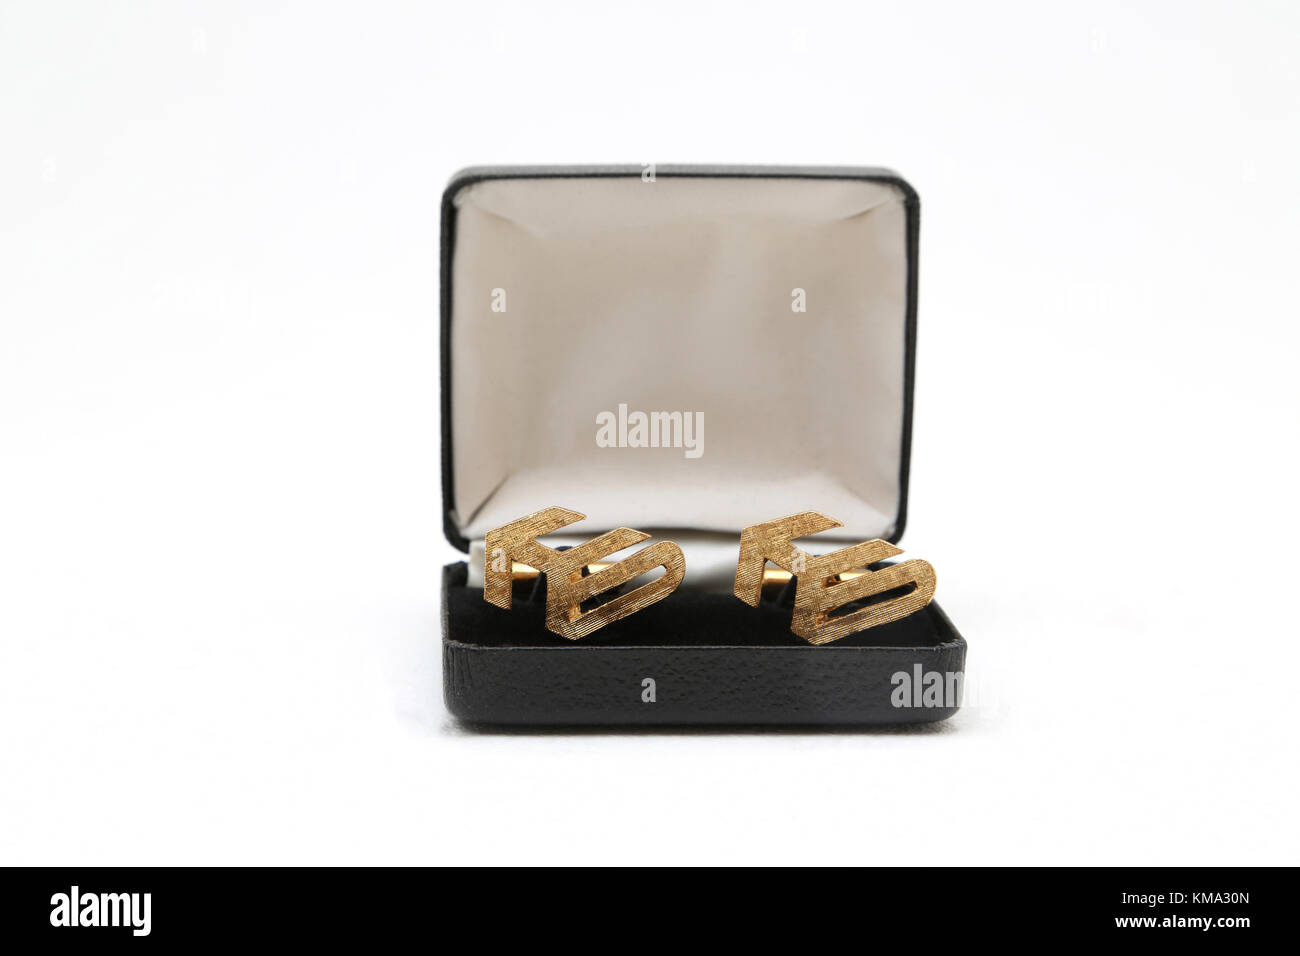 Gold Plated Hawkers Siddeley Company Cufflinks In Box Stock Photo